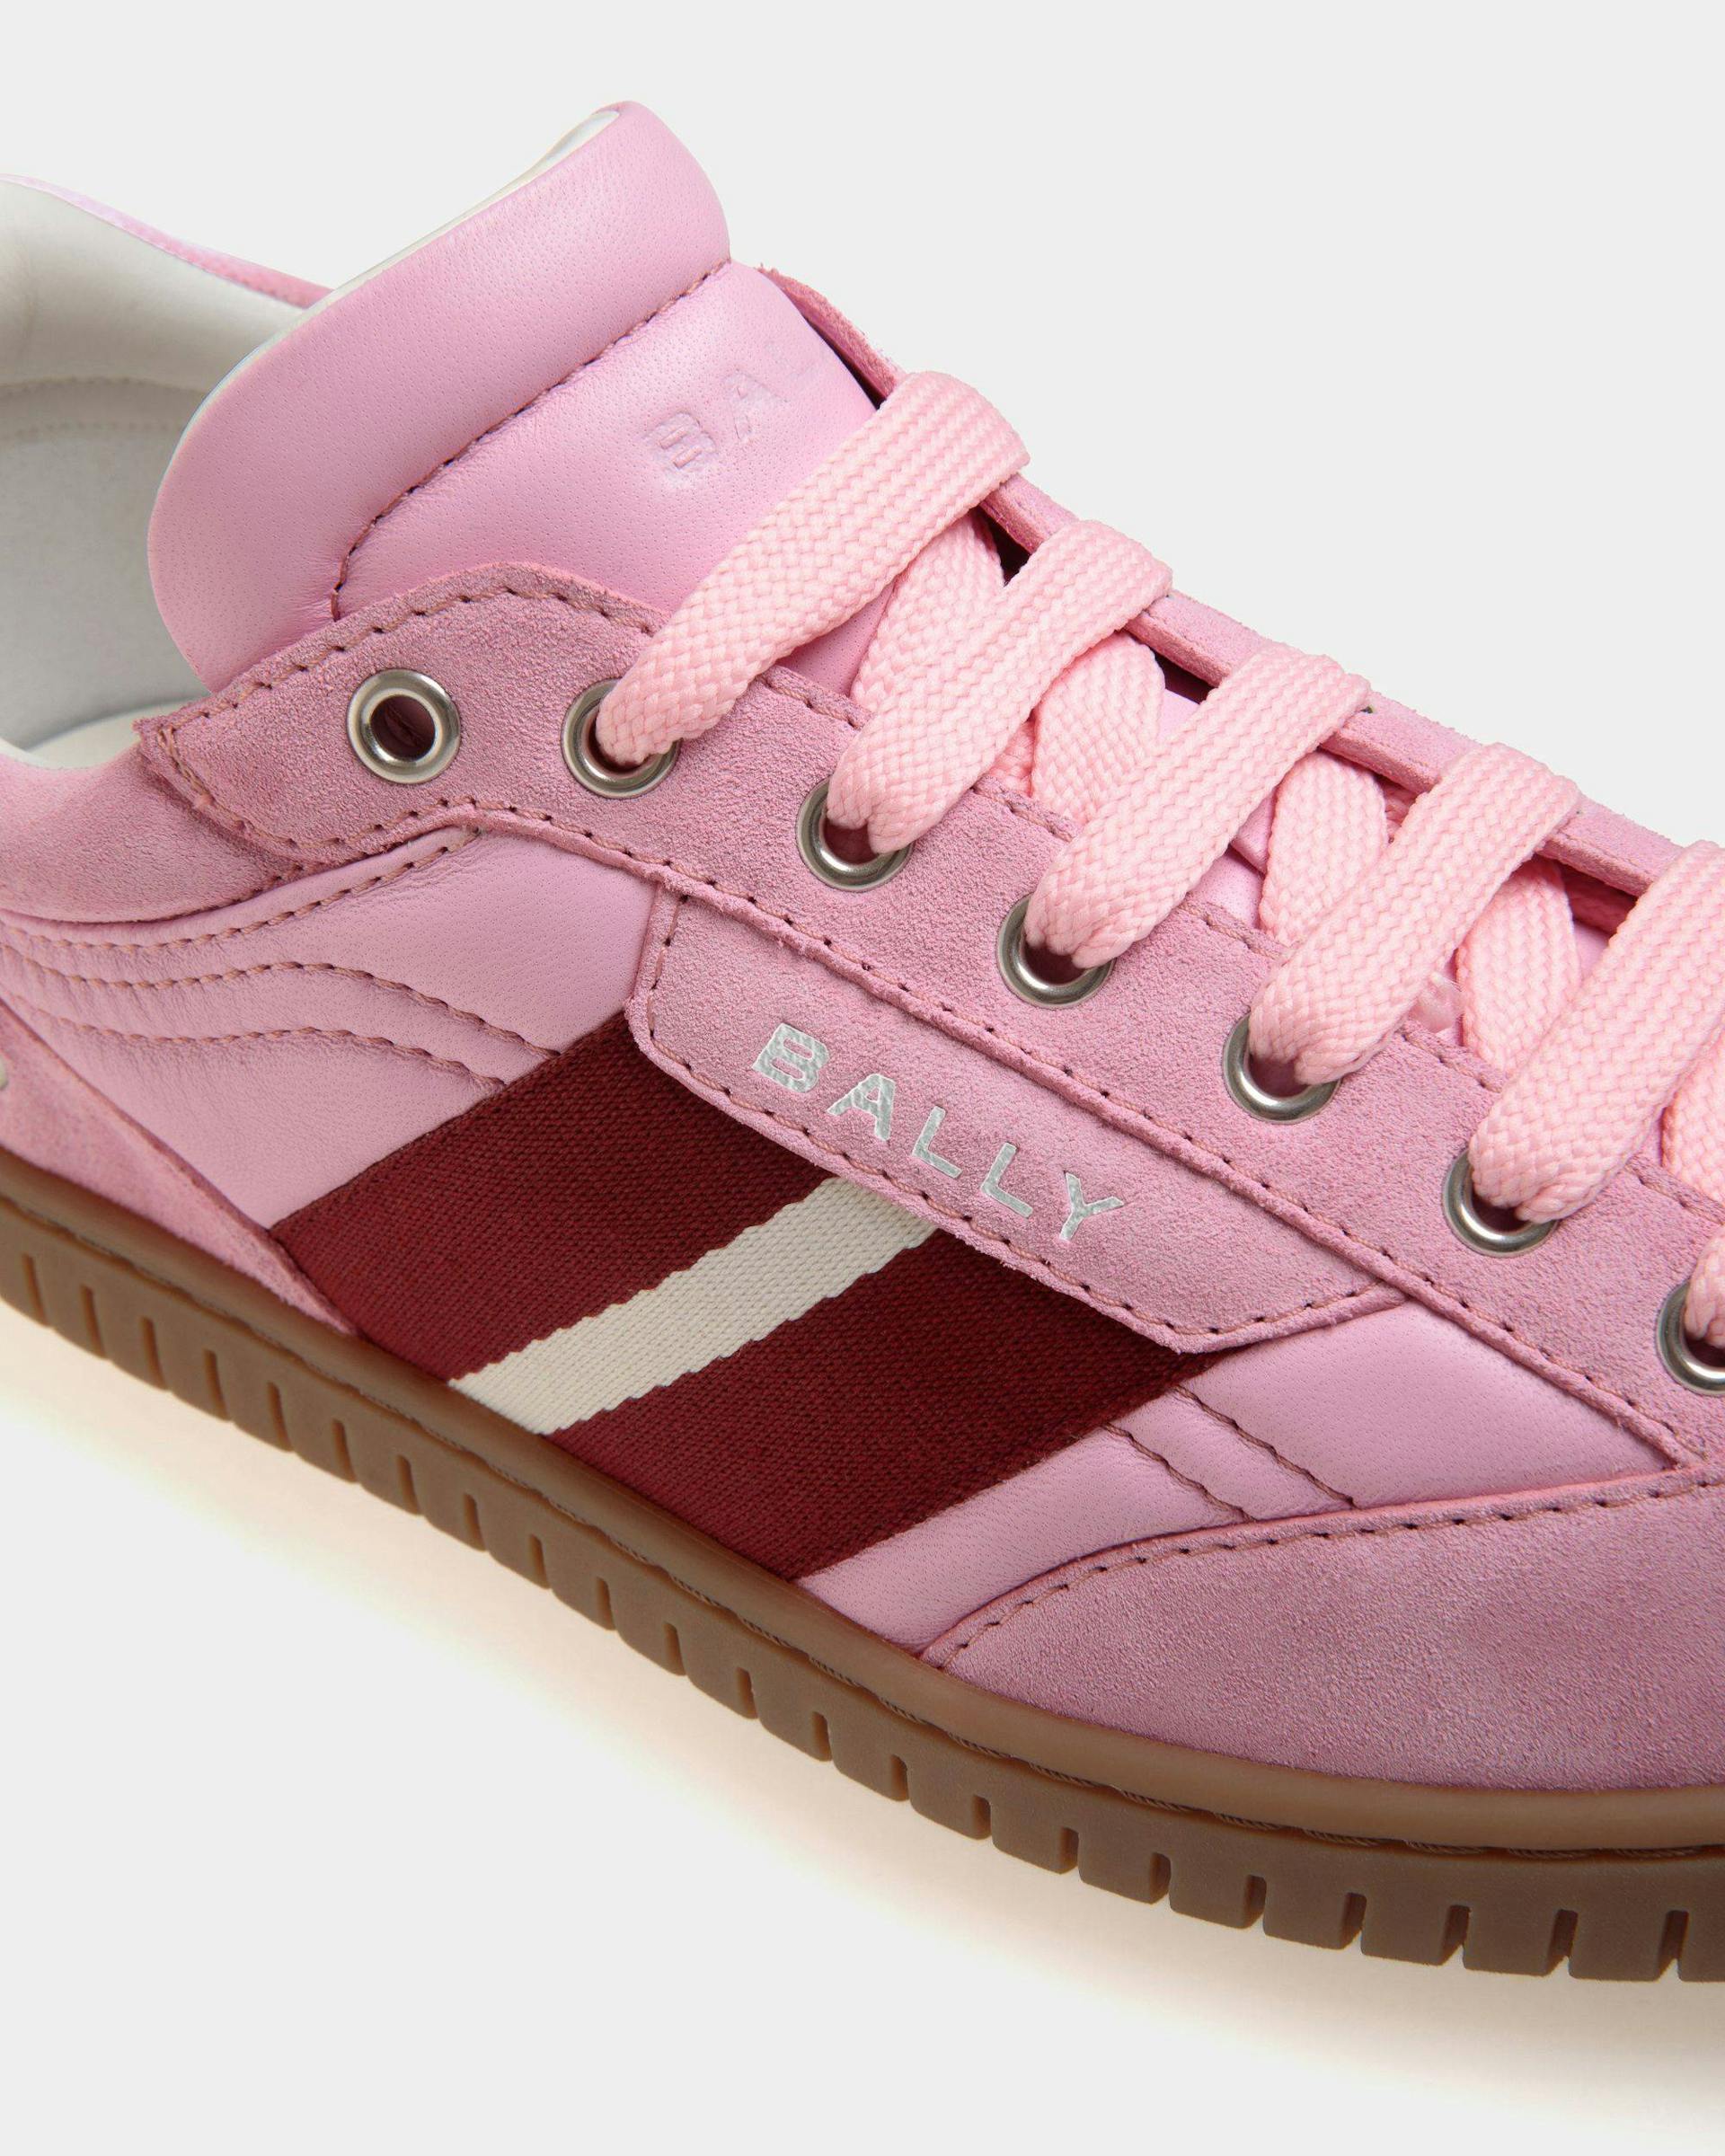 Women's Player Sneaker in Pink Leather and Suede | Bally | Still Life Detail